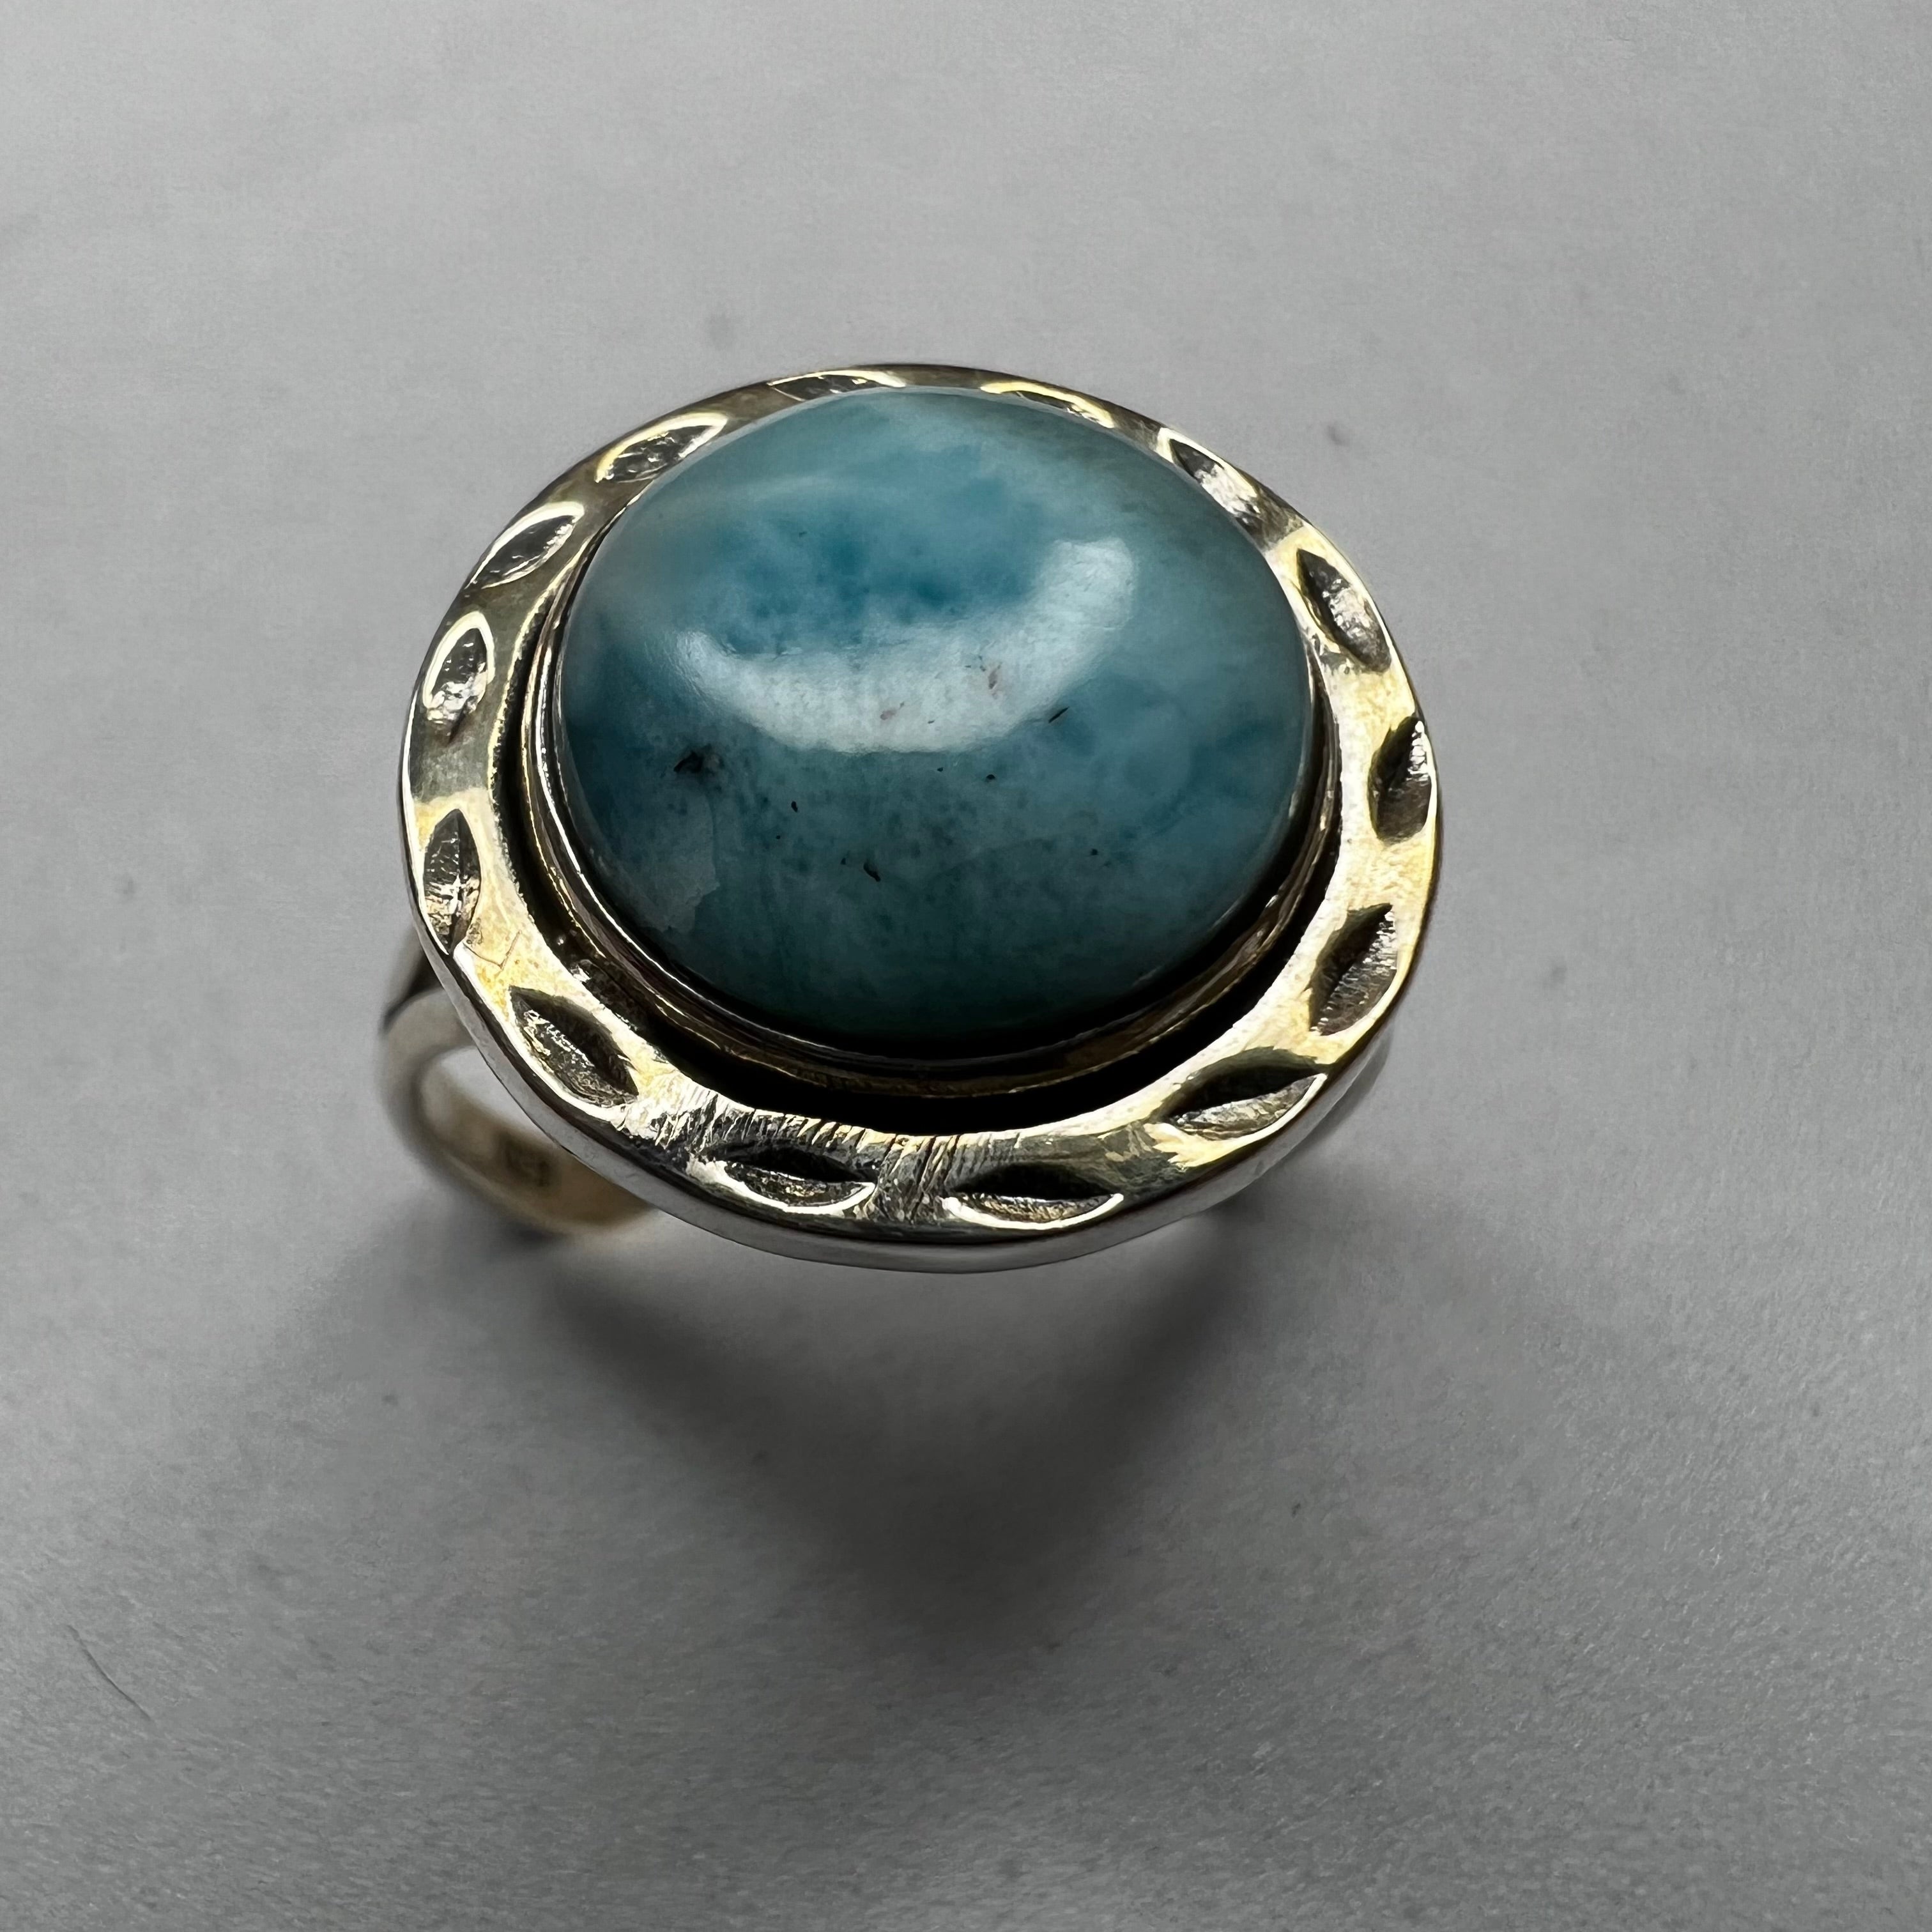 HANDCRAFTED LARIMAR RING IN
SILVER 925 (SIZE 7)